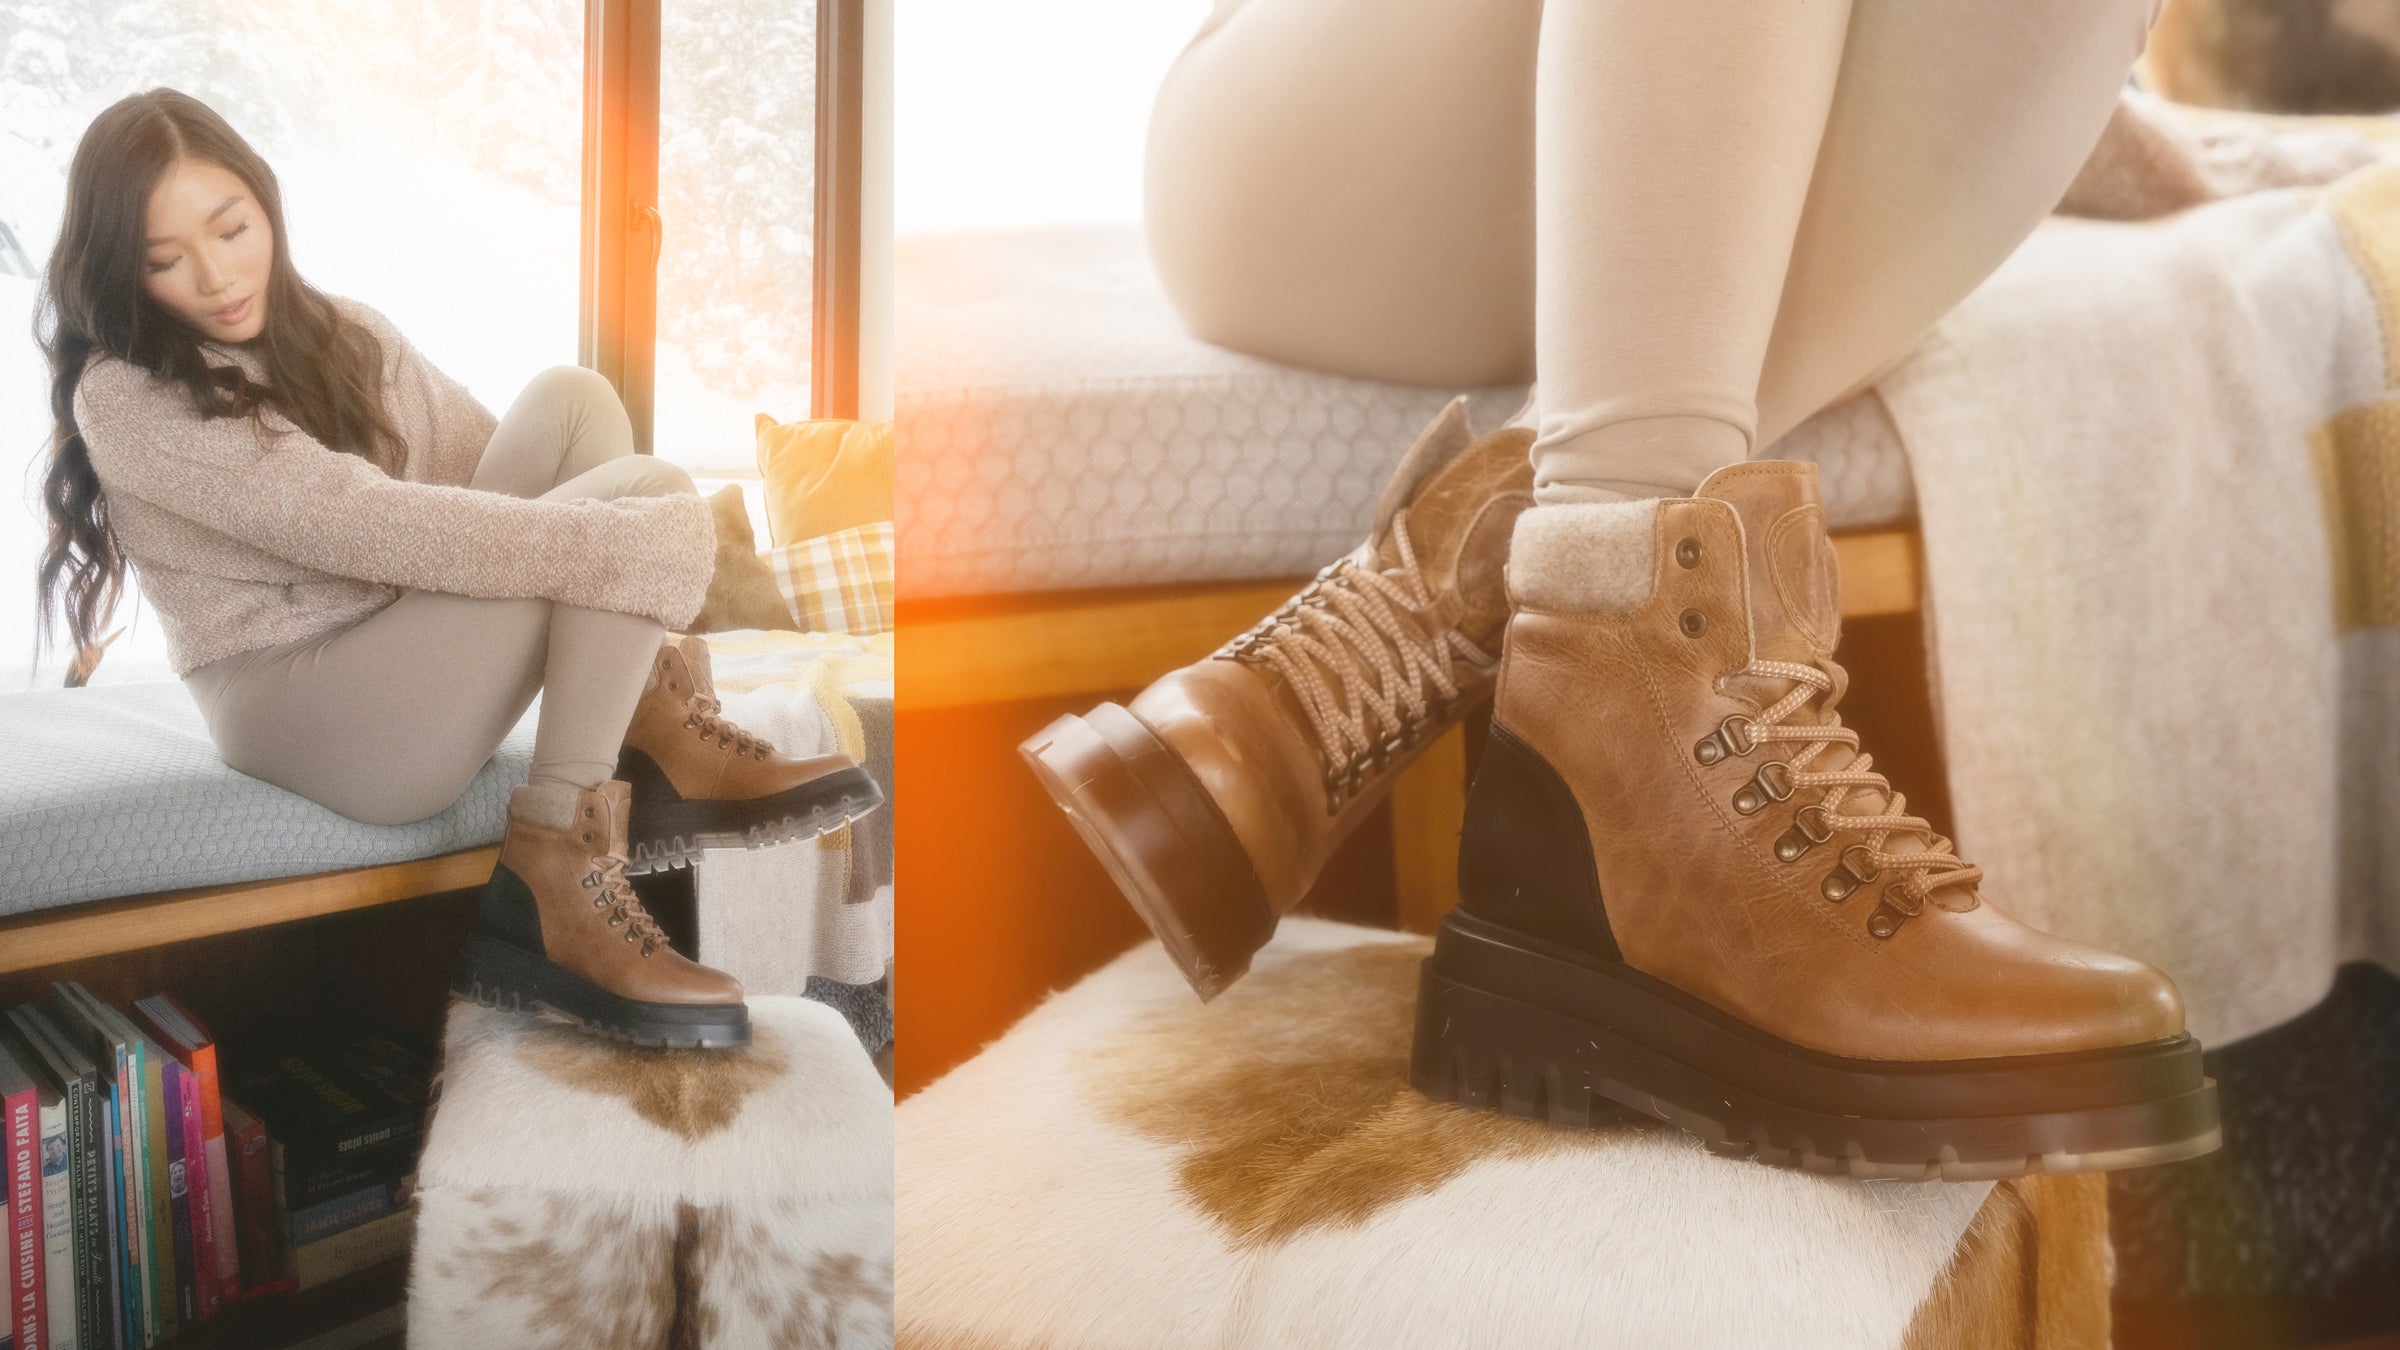 Women's Casual Boots